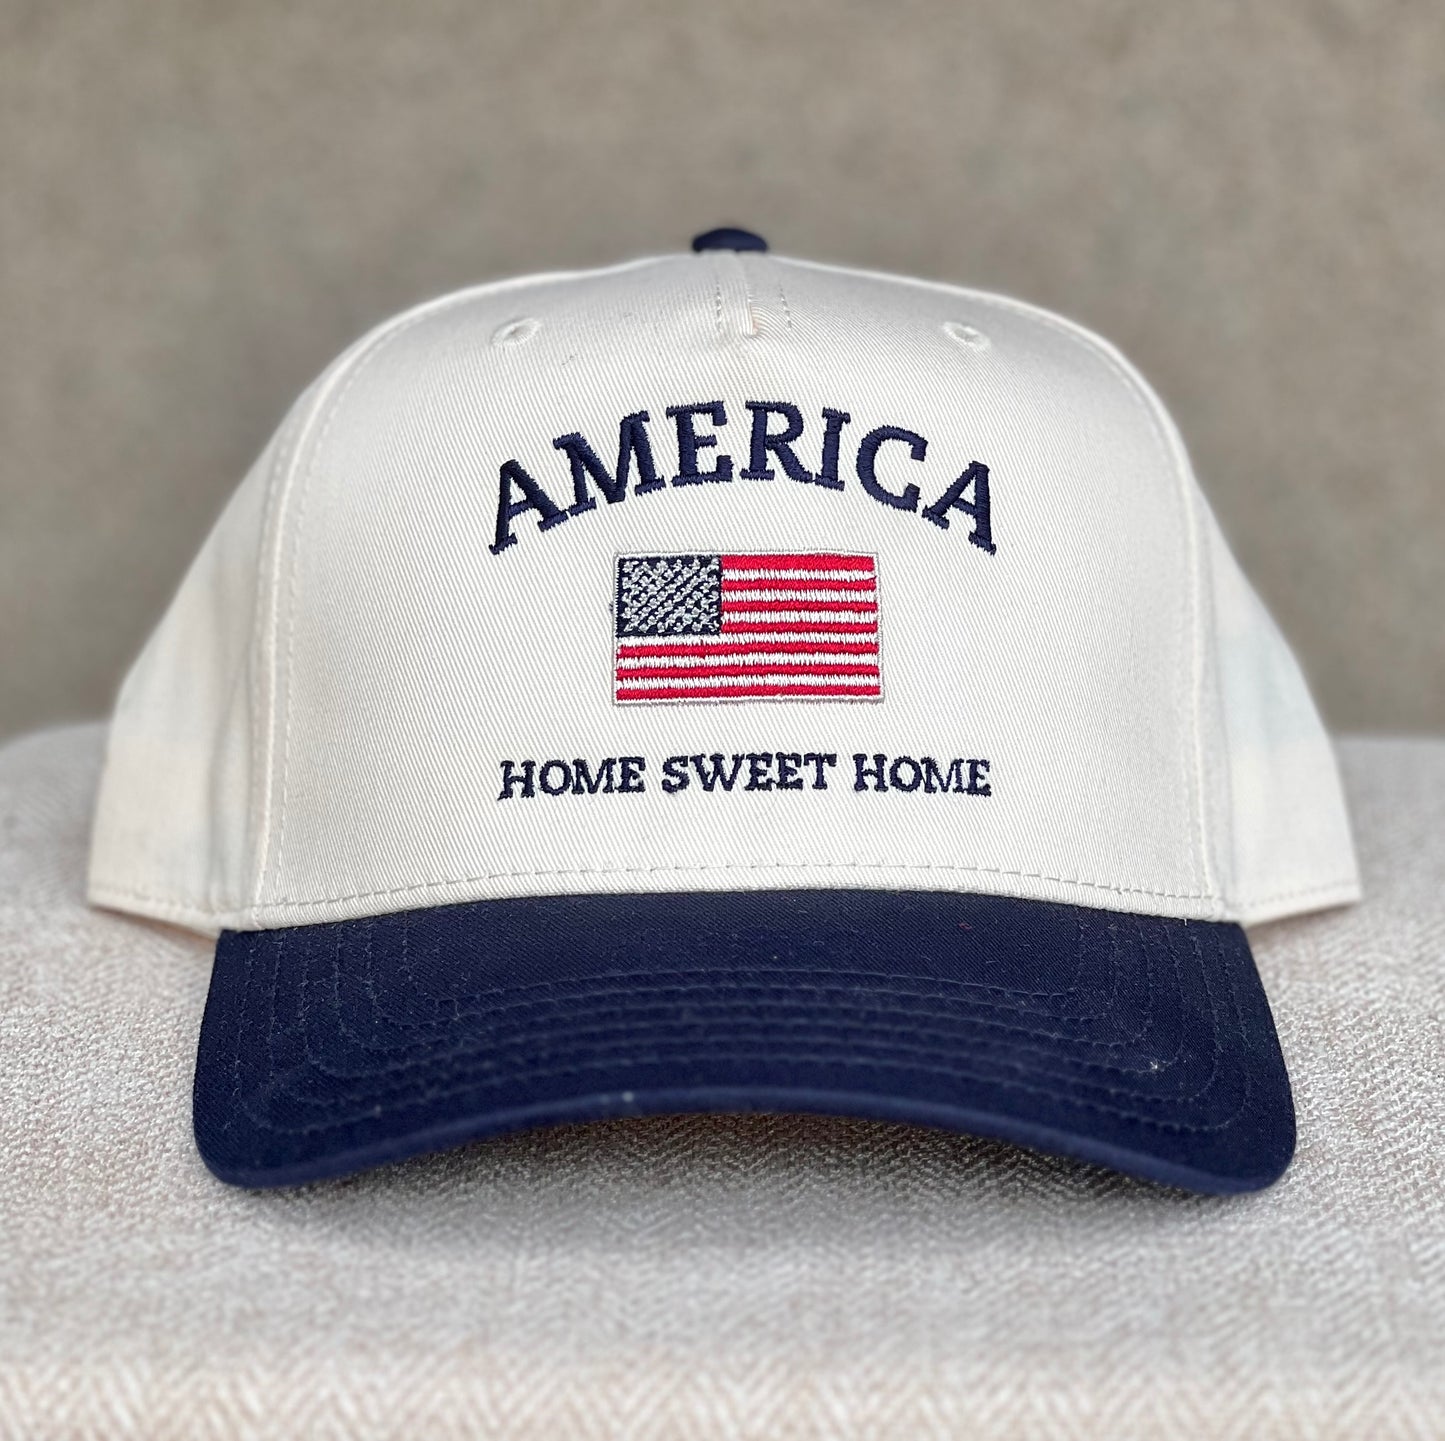 Home Sweet Home - Navy/Natural